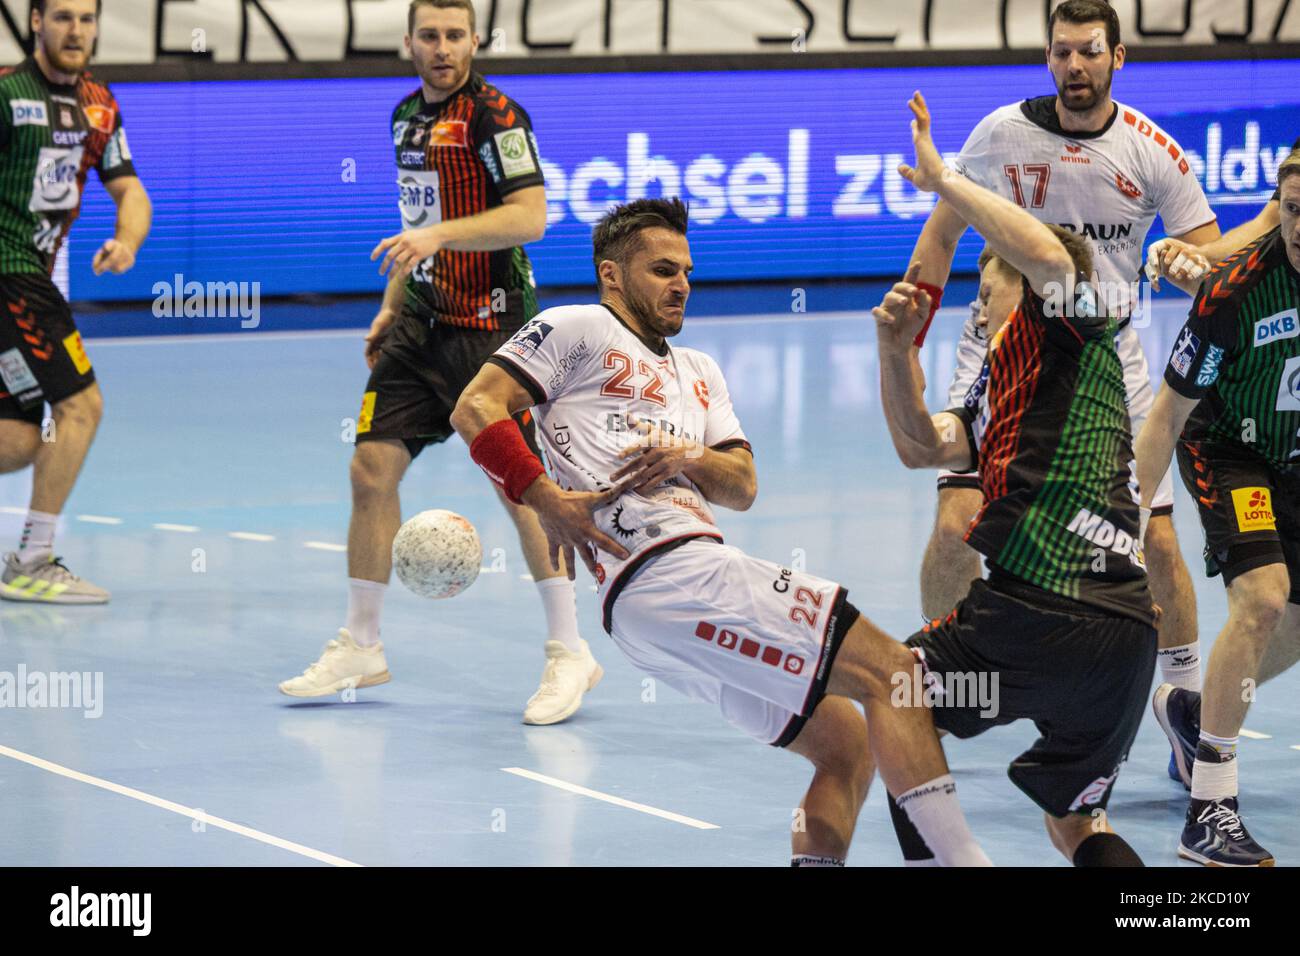 Michael Allendorf of MT Melsungen during the LIQUI MOLY Handball-Bundesliga match between SC Magdeburg and MT Melsungen at GETEC-Arena on April 18, 2021 in Magdeburg, Germany. (Photo by Peter Niedung/NurPhoto) Stock Photo